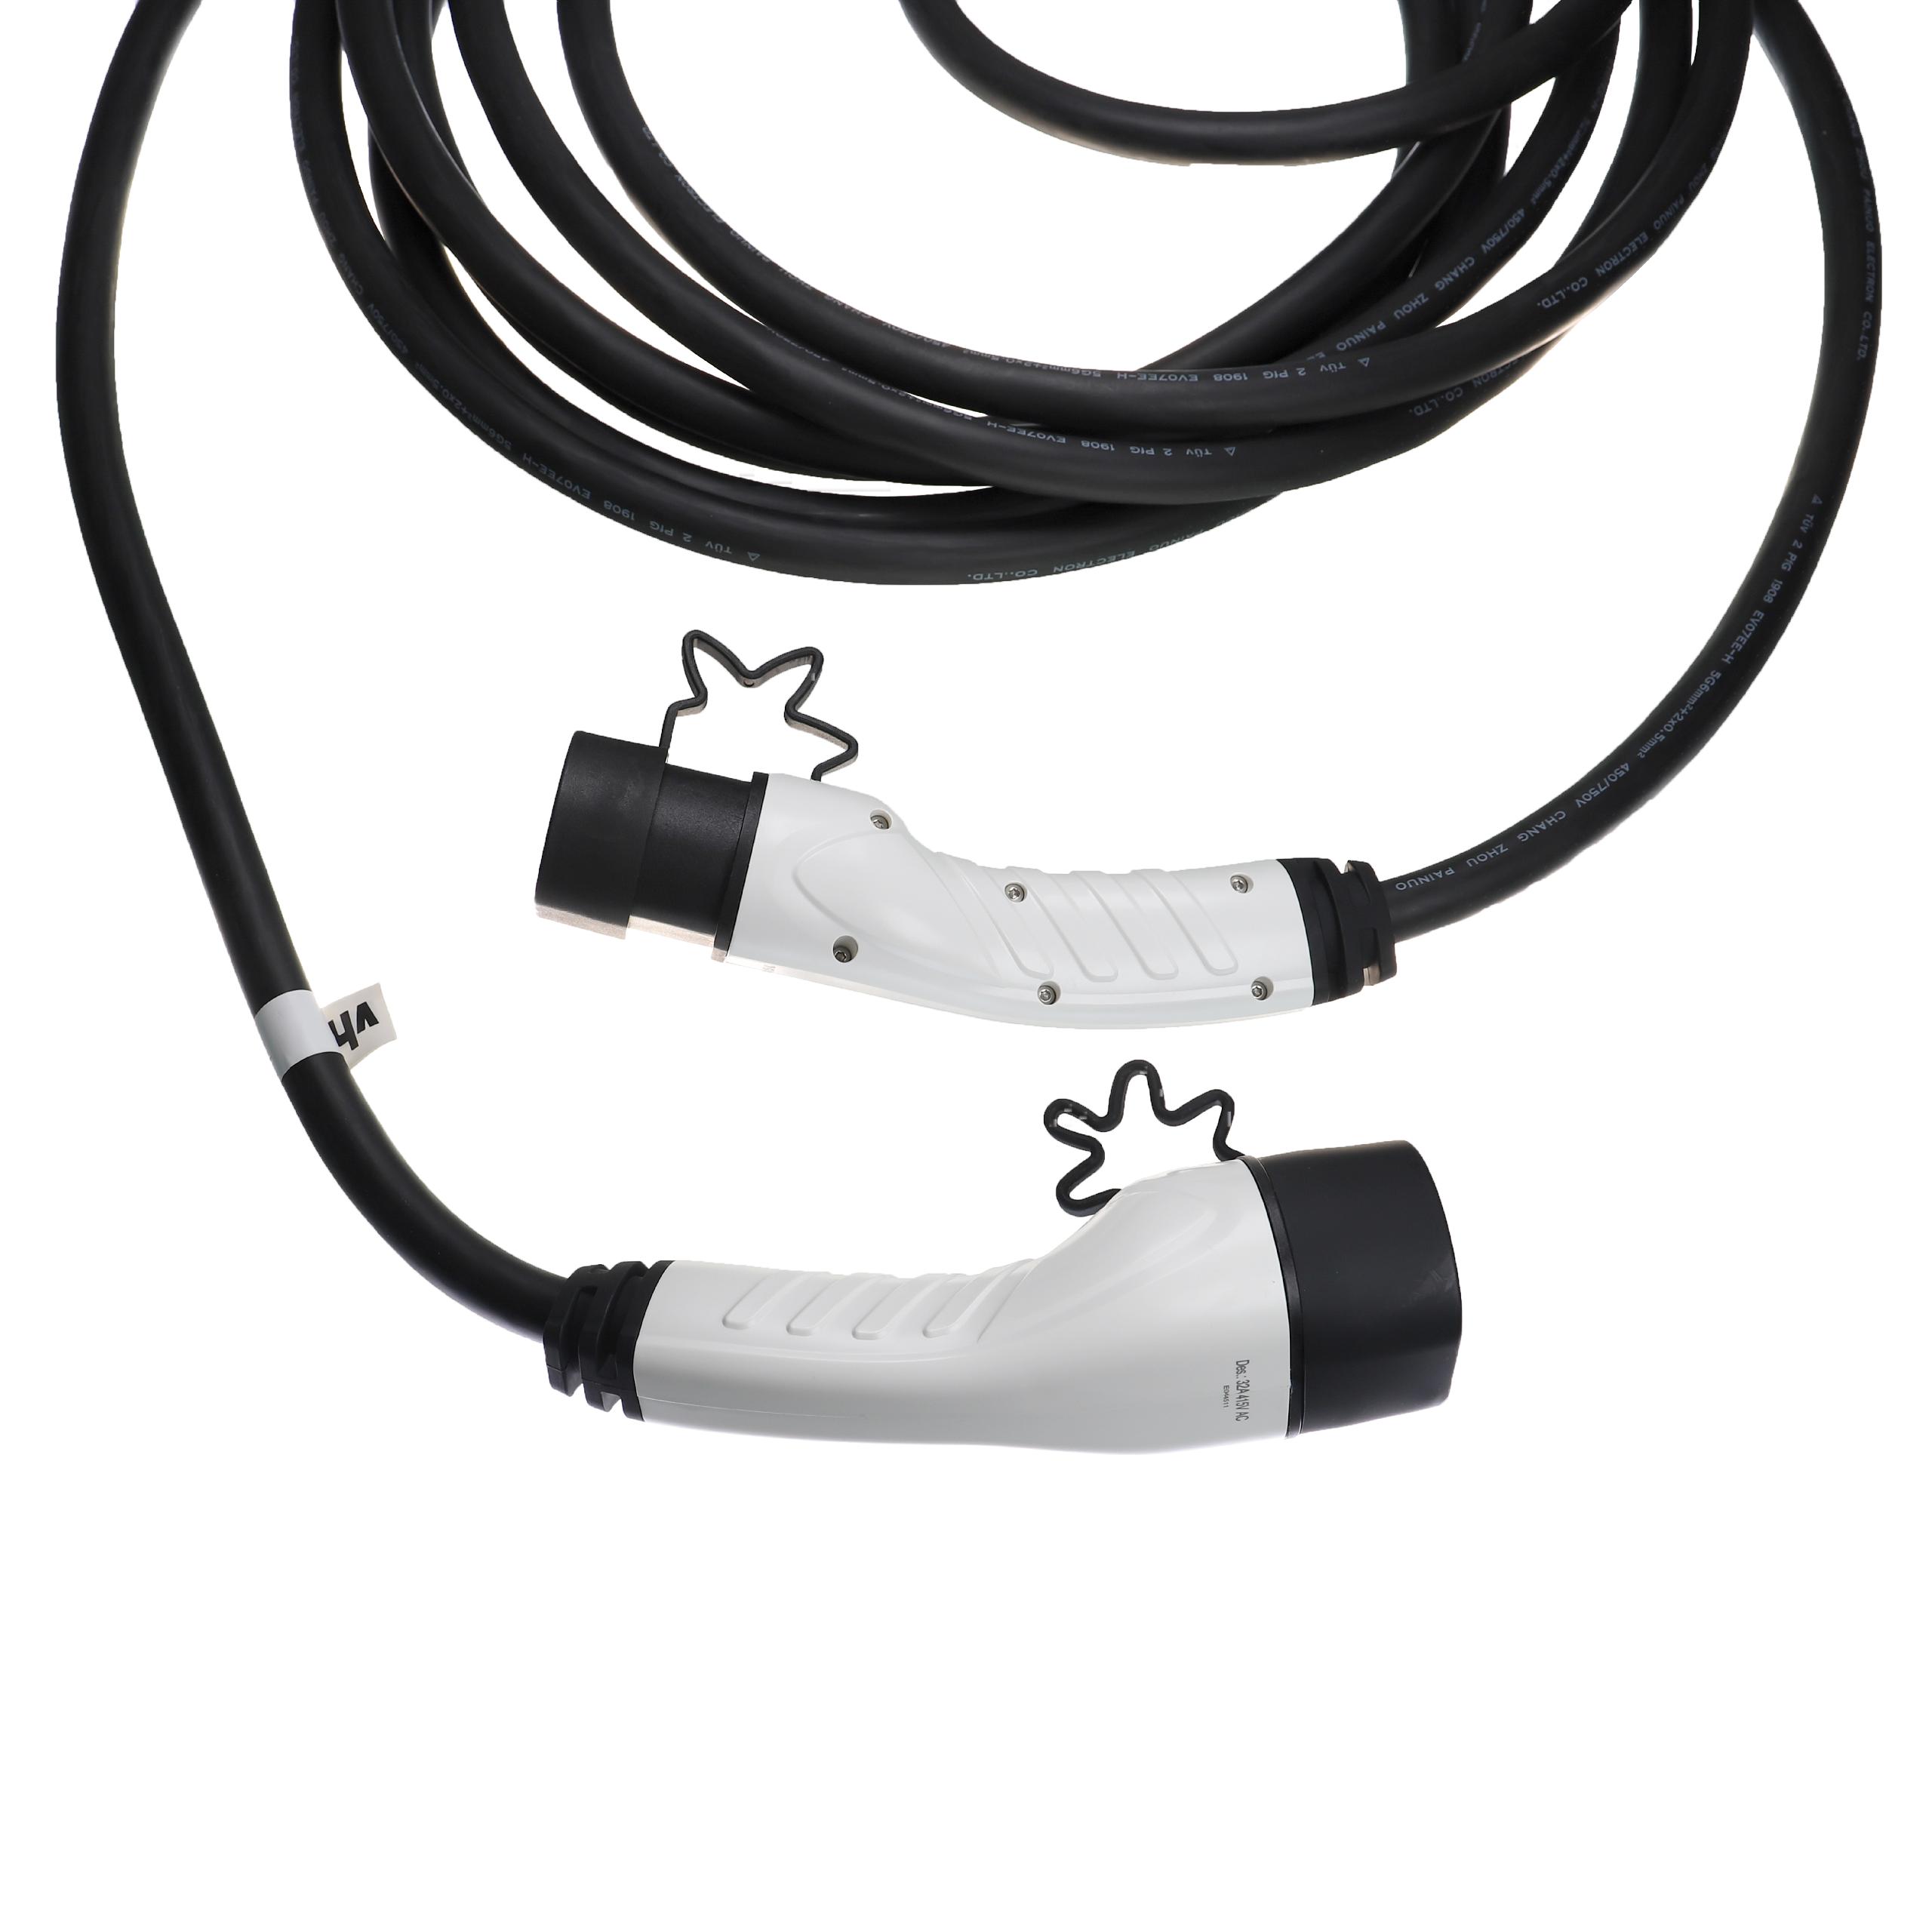 Charging Cable for Electric Car, Plug-In Hybrid - Type 2 to Type 2 Cable, 3-phase, 32 A, 22 kW, 10 m